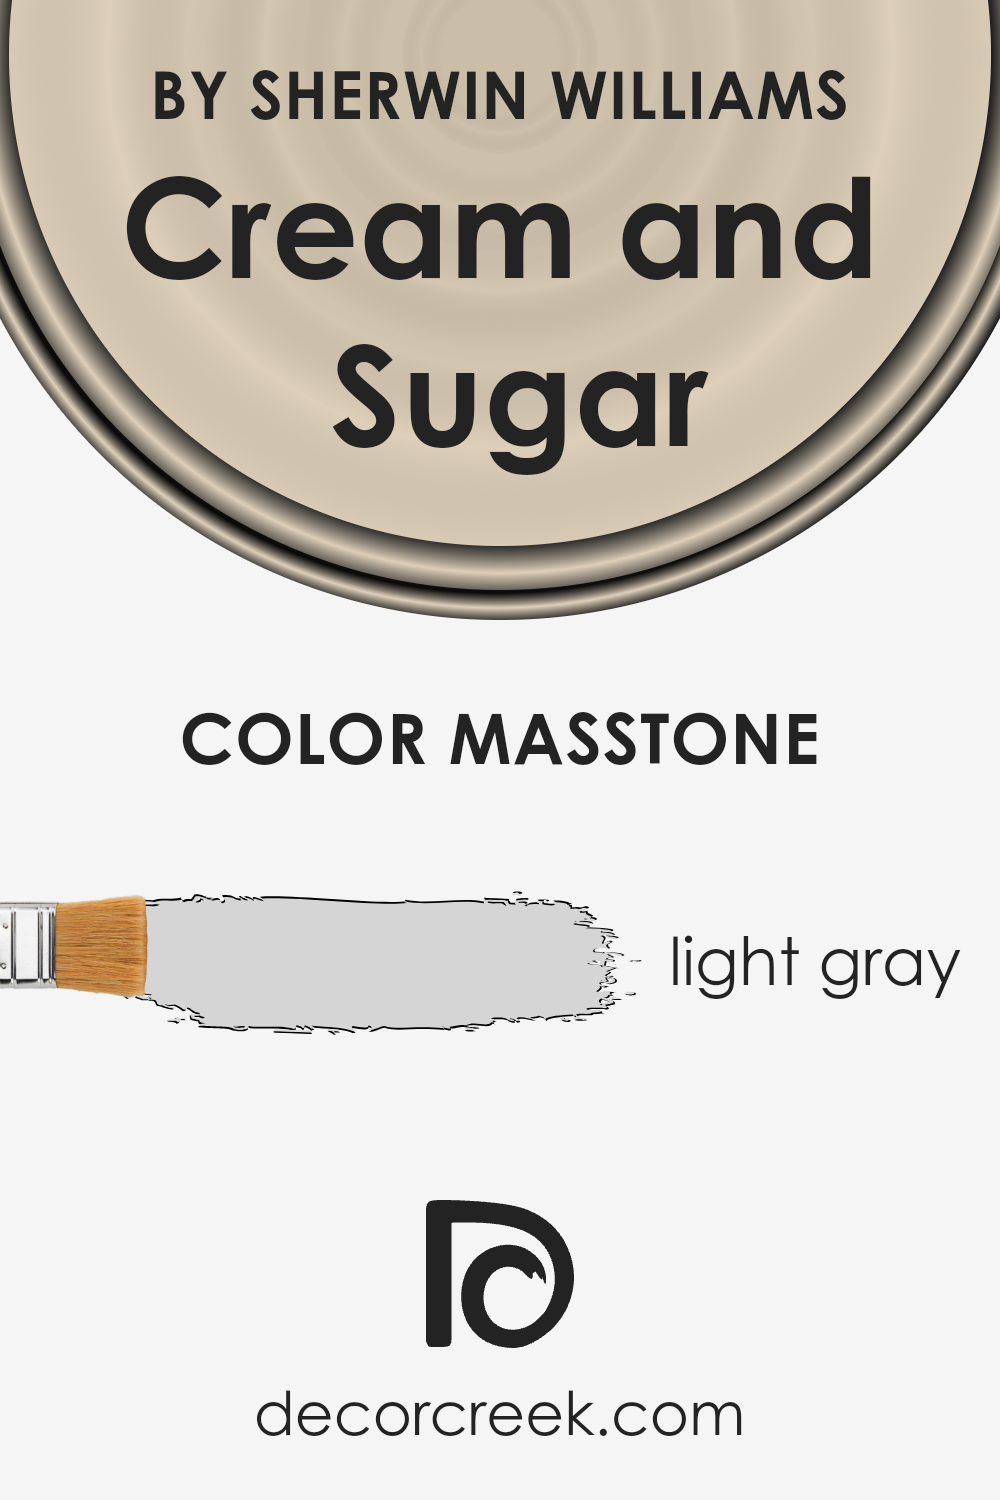 what_is_the_masstone_of_cream_and_sugar_sw_9507